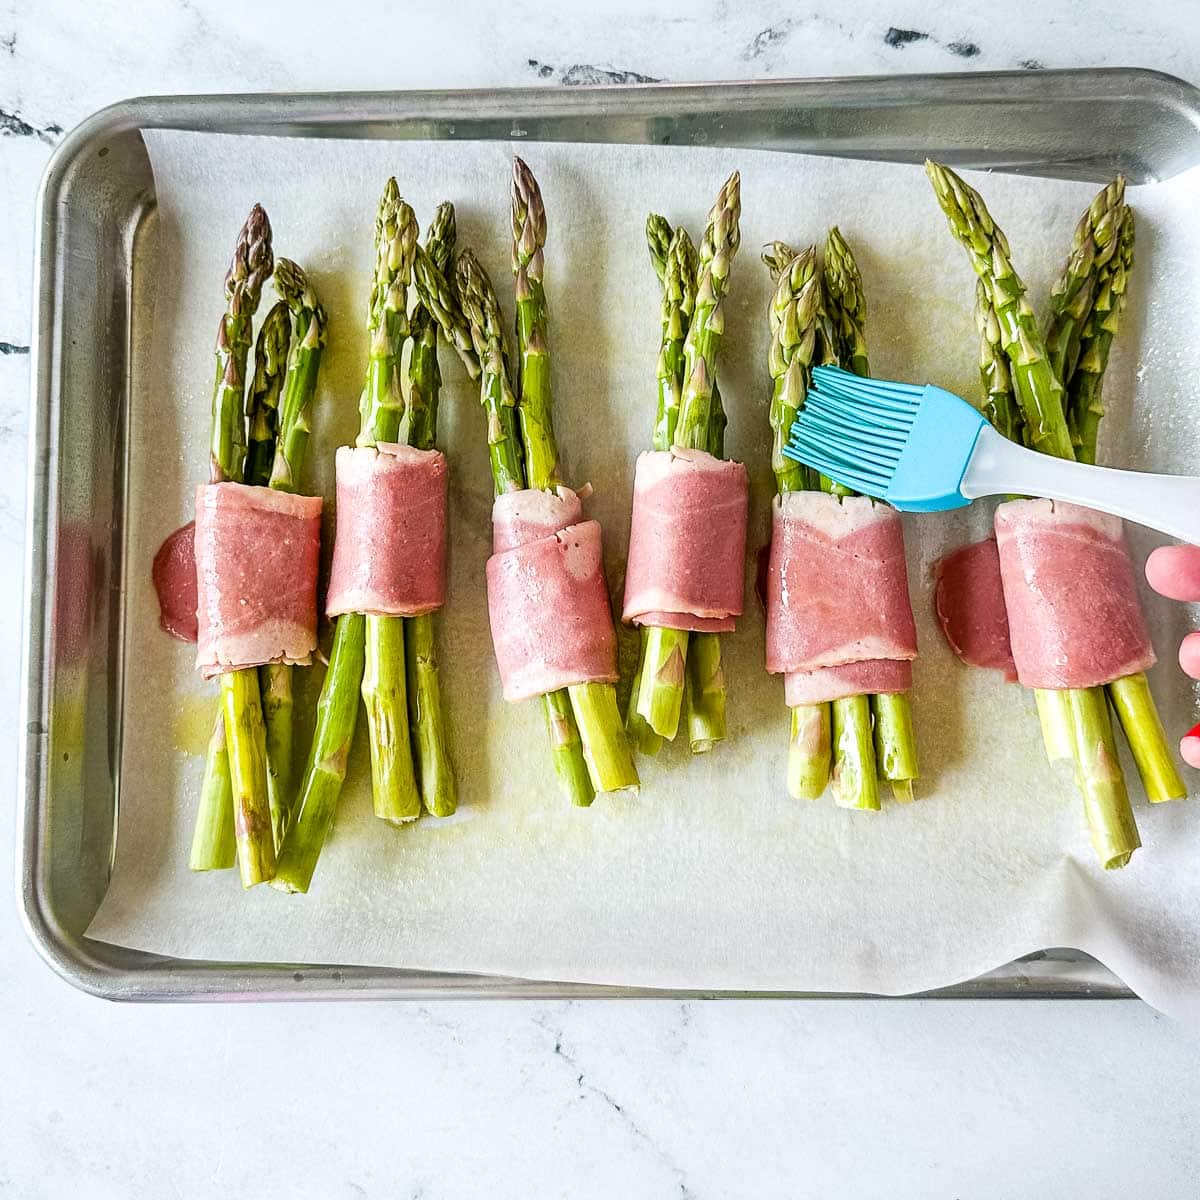 brushing turkey bacon wrapped asparagus bundles with olive oil.